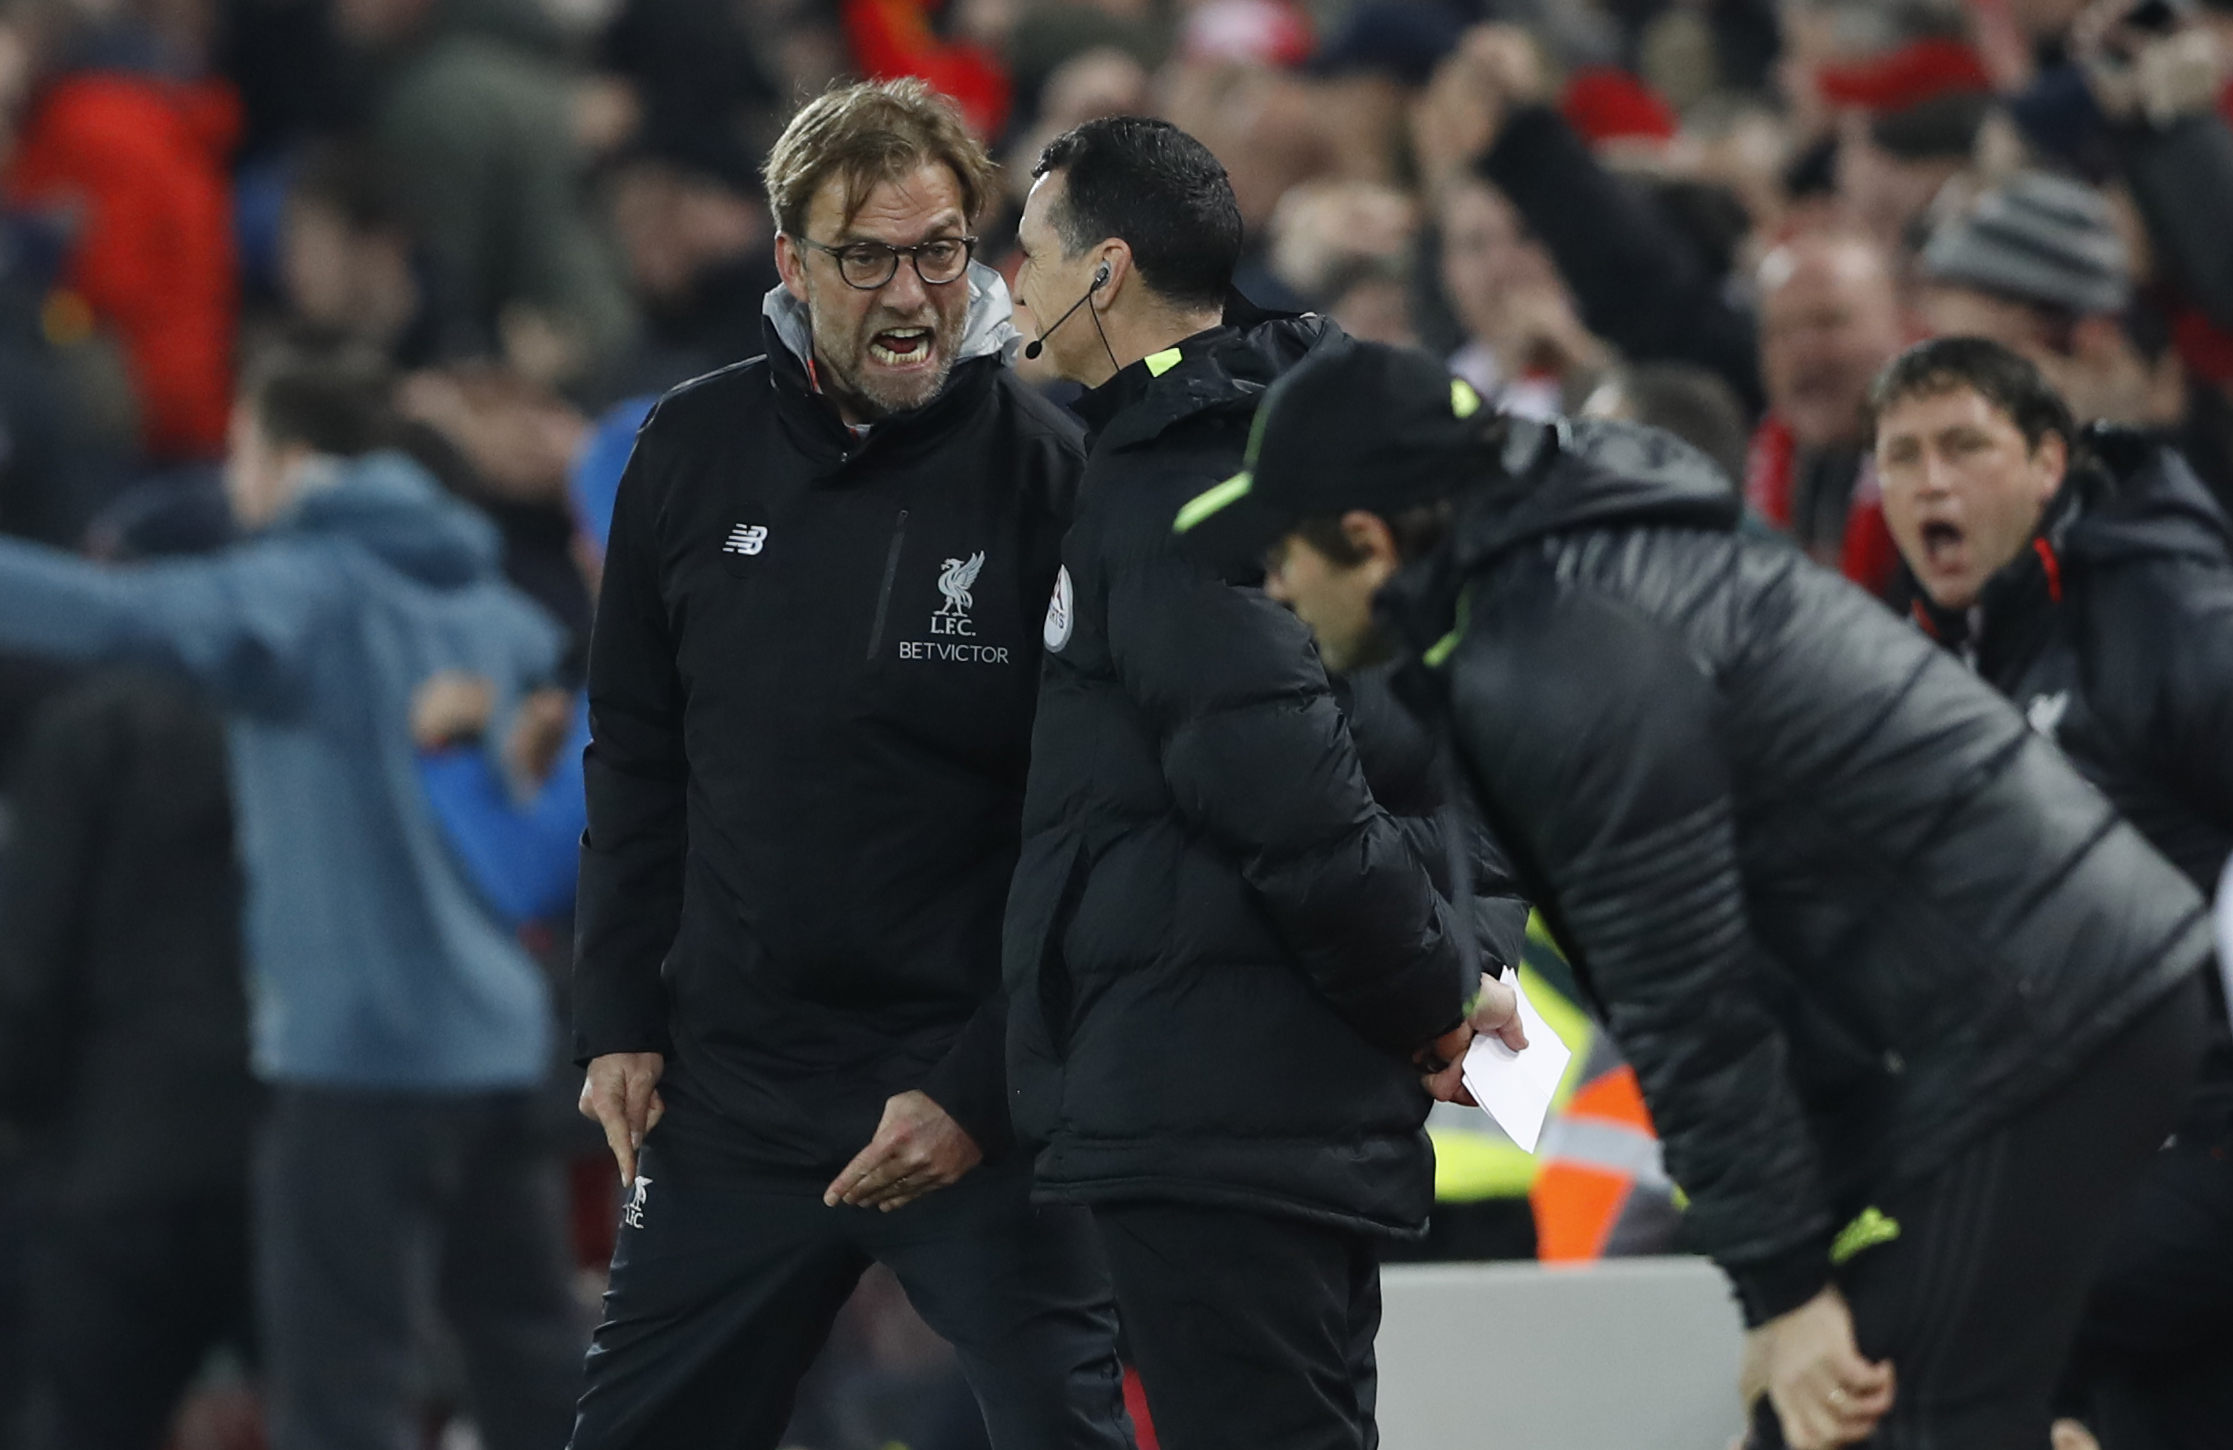 liverpool manager jurgen klopp remonstrates with the fourth official after chelsea are awarded a penalty photo reuters